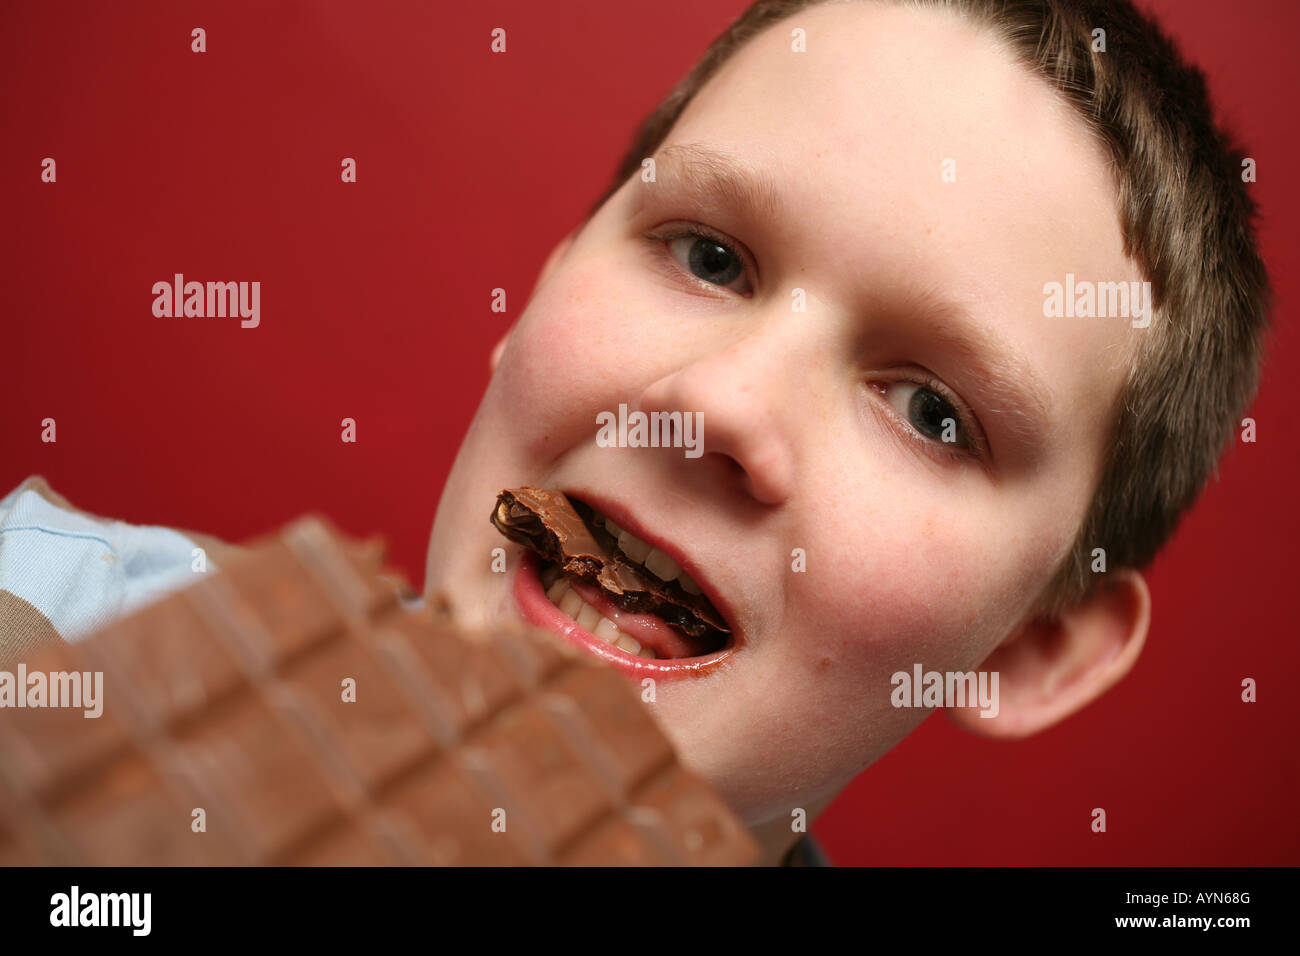 11 year old boy eating chocolate Stock Photo